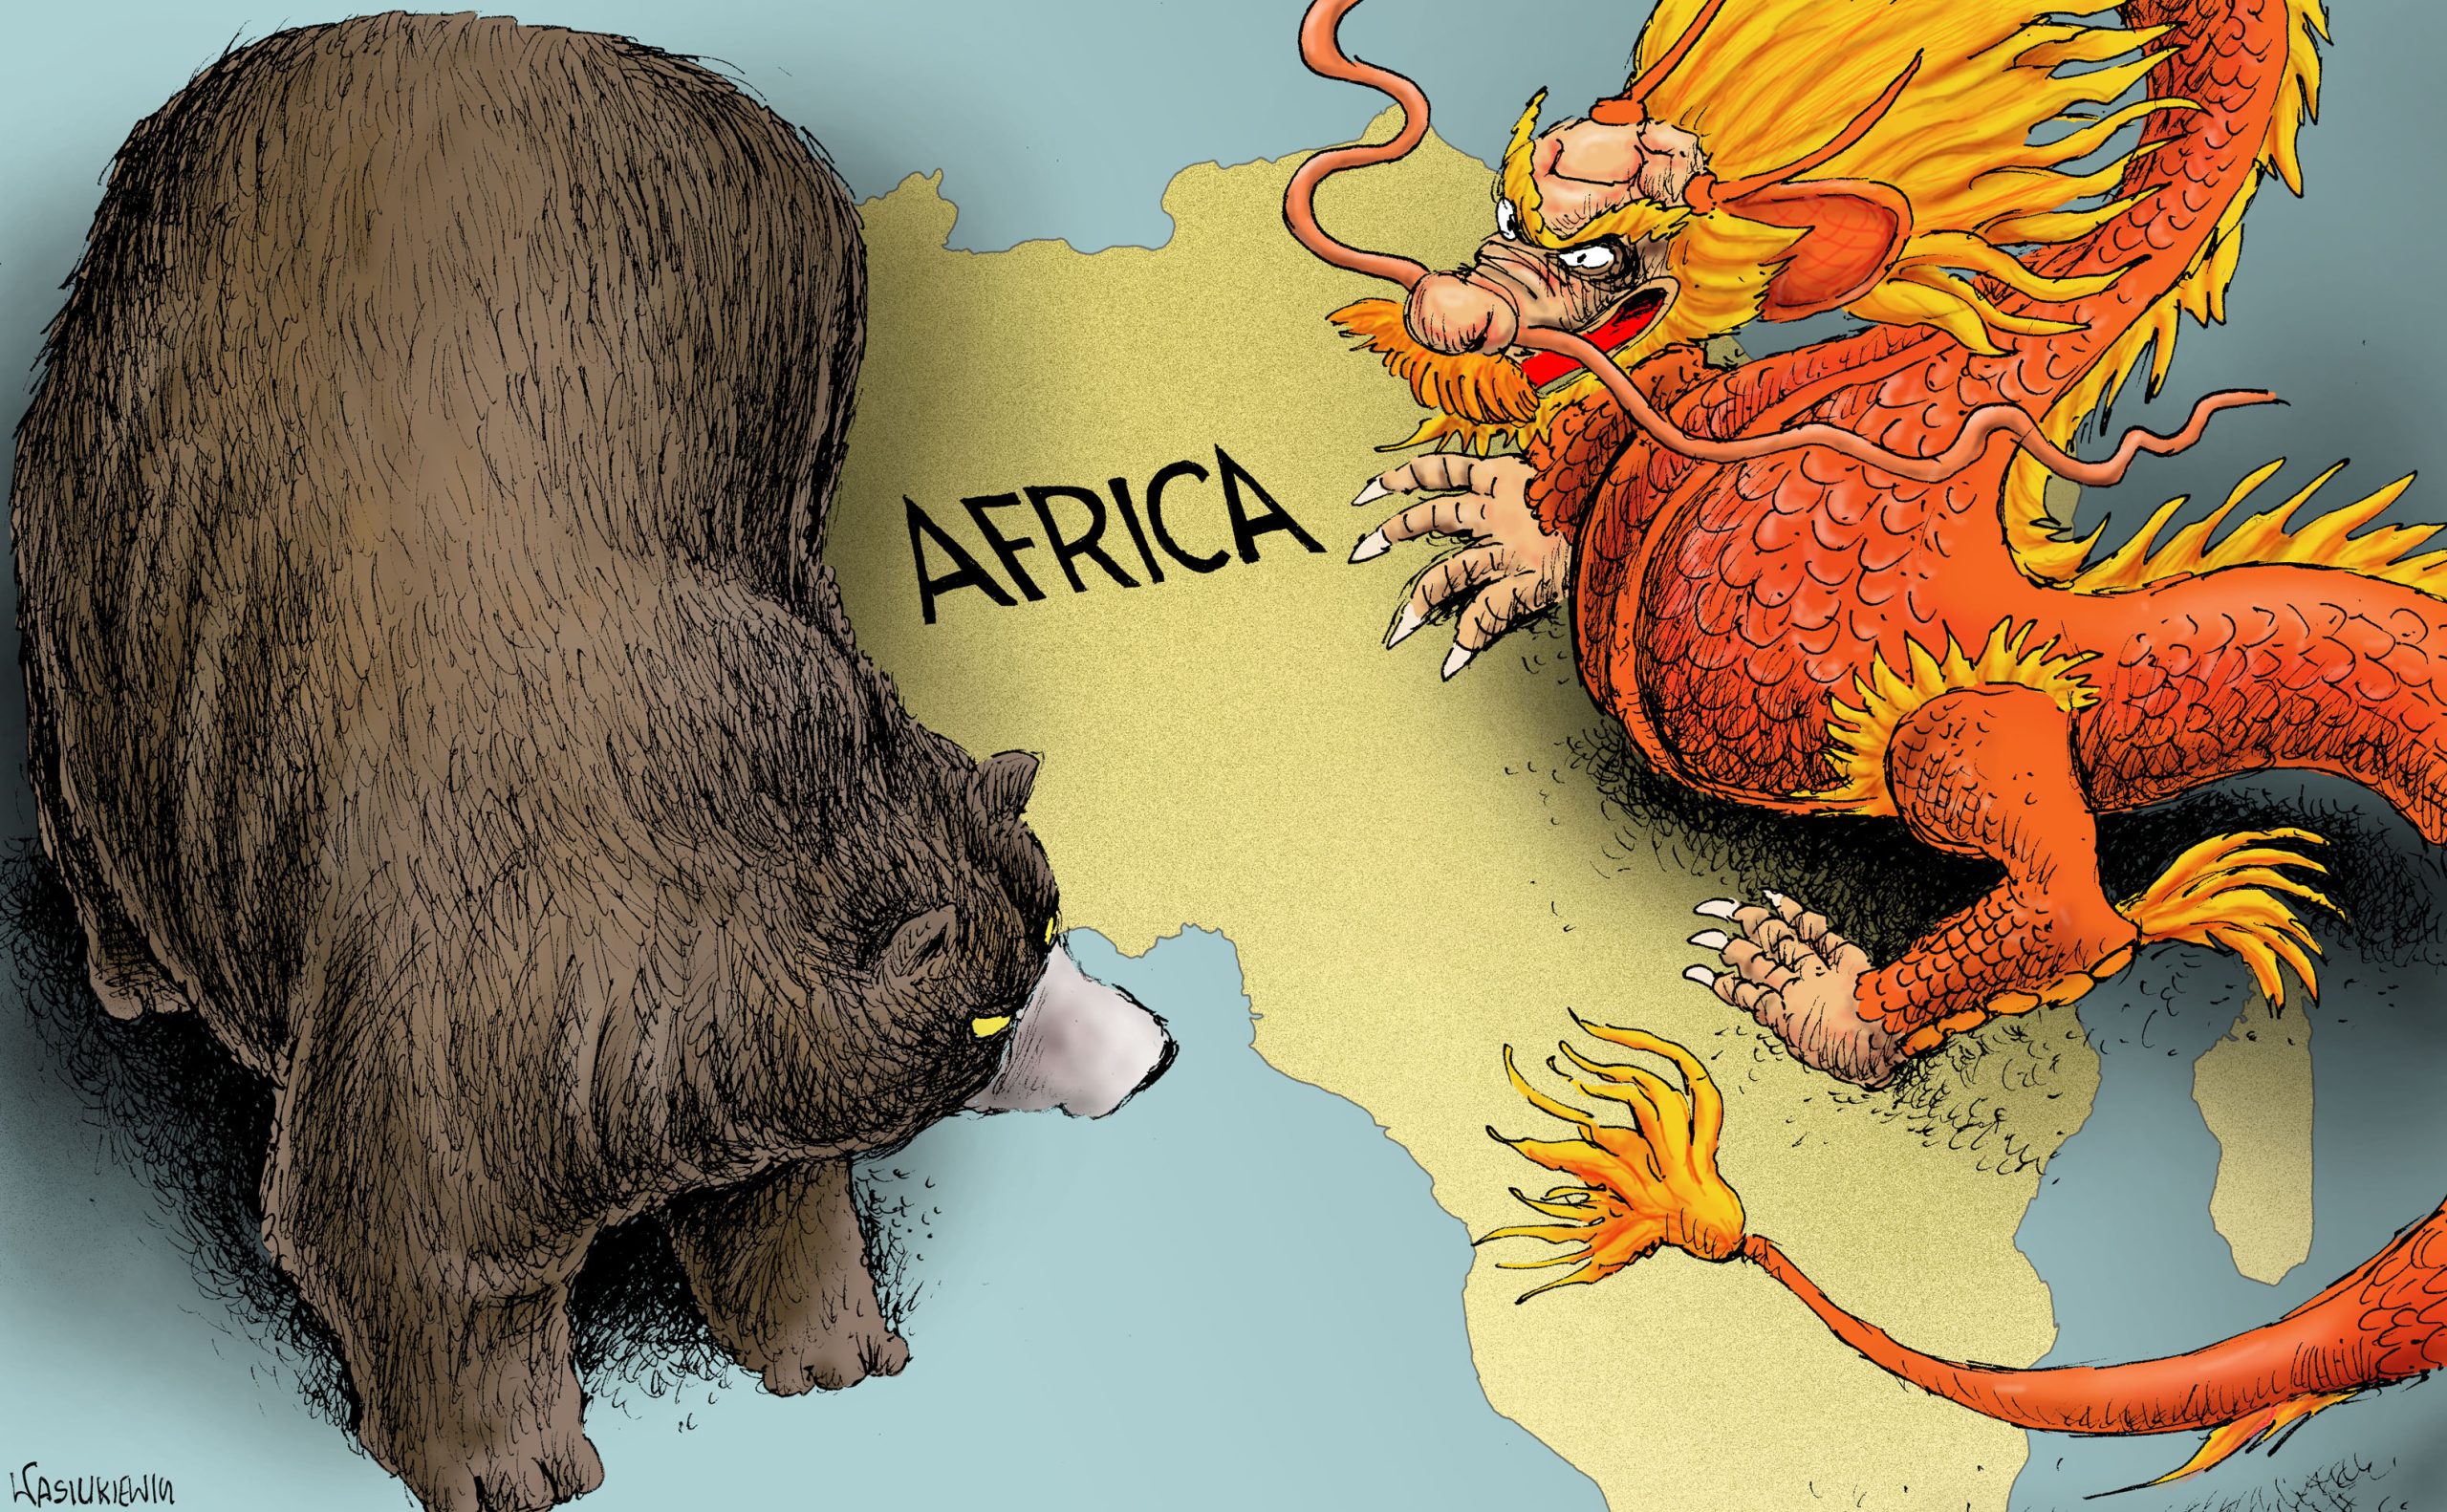 The Rising Threat to Central Africa: The 2021 Transformation of